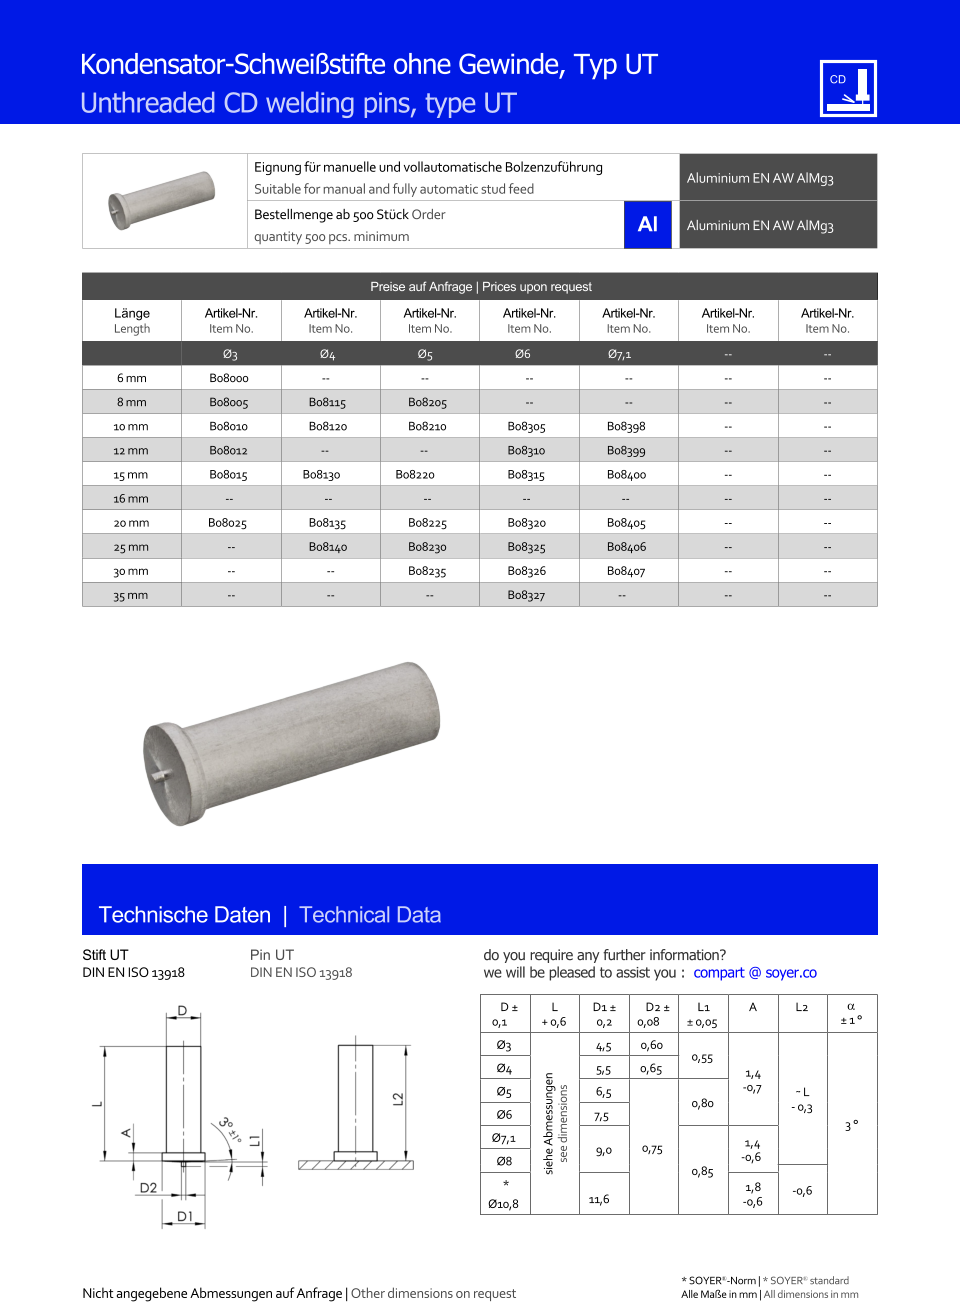 Eignung fr manuelle und vollautomatische Bolzenzufhrung Suitable for manual and fully automatic stud feed Aluminium EN AW AlMg3  Bestellmenge ab 500 Stck Order quantity 500 pcs. minimum Aluminium EN AW AlMg3 Technische Daten  |  Technical Data Kondensator-Schweistifte ohne Gewinde, Typ UT Unthreaded CD welding pins, type UT Preise auf Anfrage | Prices upon request  Lnge Length Artikel-Nr. Item No. Artikel-Nr. Item No. Artikel-Nr. Item No. Artikel-Nr. Item No. Artikel-Nr. Item No. Artikel-Nr. Item No. Artikel-Nr. Item No. Ø3 Ø4 Ø5 Ø6 Ø7,1 	-- 	-- 6 mm 	B08000 -- -- 	-- 	-- 	-- 	-- 8 mm 	B08005 	B08115 	B08205 	-- 	-- 	-- 	-- 10 mm 	B08010 	B08120 	B08210 	B08305 	B08398 	-- 	-- 12 mm 	B08012 -- -- 	B08310 	B08399 	-- 	-- 15 mm 	B08015 B08130 B08220 	B08315 	B08400 	-- 	-- 16 mm -- -- -- -- -- 	-- 	-- 20 mm B08025 	B08135 	B08225 	B08320 	B08405 	-- 	-- 25 mm 	-- 	B08140 	B08230 	B08325 	B08406 	-- 	-- 30 mm 	-- 	-- 	B08235 	B08326 	B08407 	-- 	-- 35 mm 	-- 	-- -- 	B08327 -- 	-- 	-- Stift UT DIN EN ISO 13918 Pin UT DIN EN ISO 13918 D  0,1 L + 0,6 D1  0,2 D2  0,08 L1  0,05 A L2   1  Ø3 siehe Abmessungen see dimensions 4,5 0,60 0,55 1,4 -0,7 ˜ L - 0,3 3  Ø4 	5,5 0,65 Ø5 	6,5 0,75 0,80 Ø6 7,5 Ø7,1 9,0 0,85 1,4 Ø8 -0,6 -0,6 * Ø10,8 11,6 1,8 -0,6 Nicht angegebene Abmessungen auf Anfrage | Other dimensions on request 	Alle Mae in mm | All dimensions in mm * SOYER-Norm | * SOYER standard do you require any further information?  we will be pleased to assist you :  compart @ soyer.co